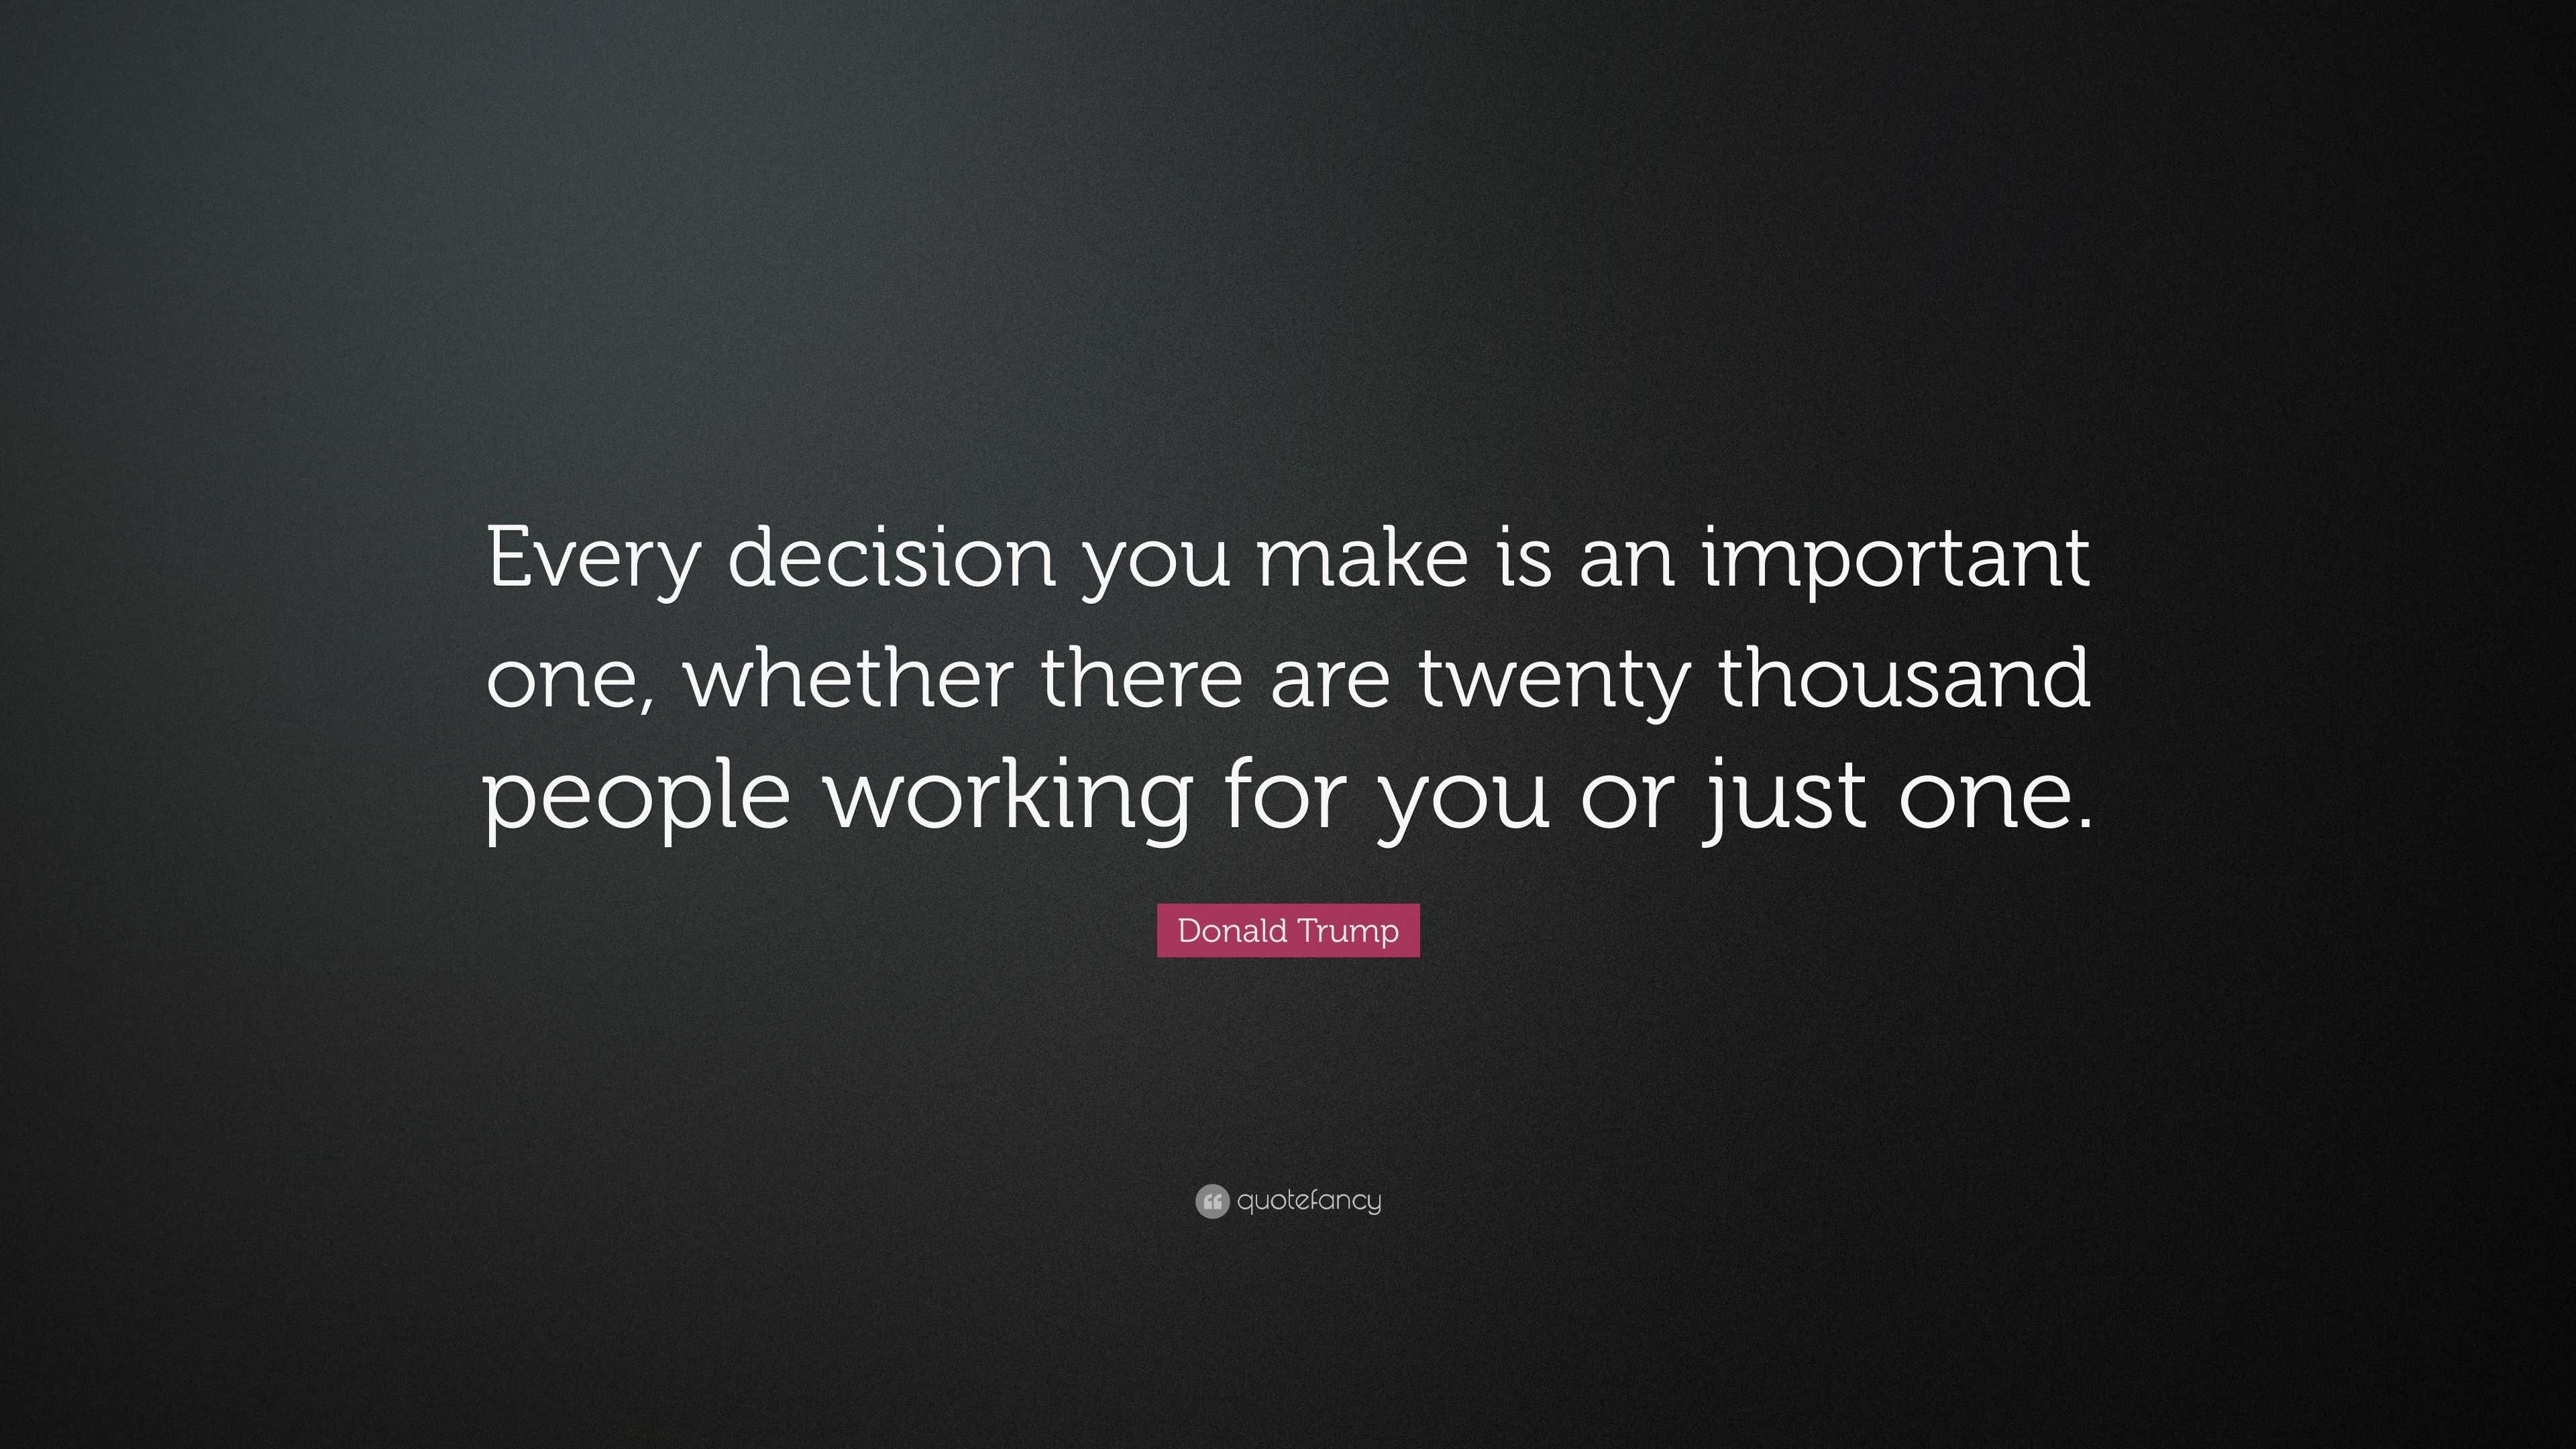 Donald Trump Quote: “Every decision you make is an important one ...